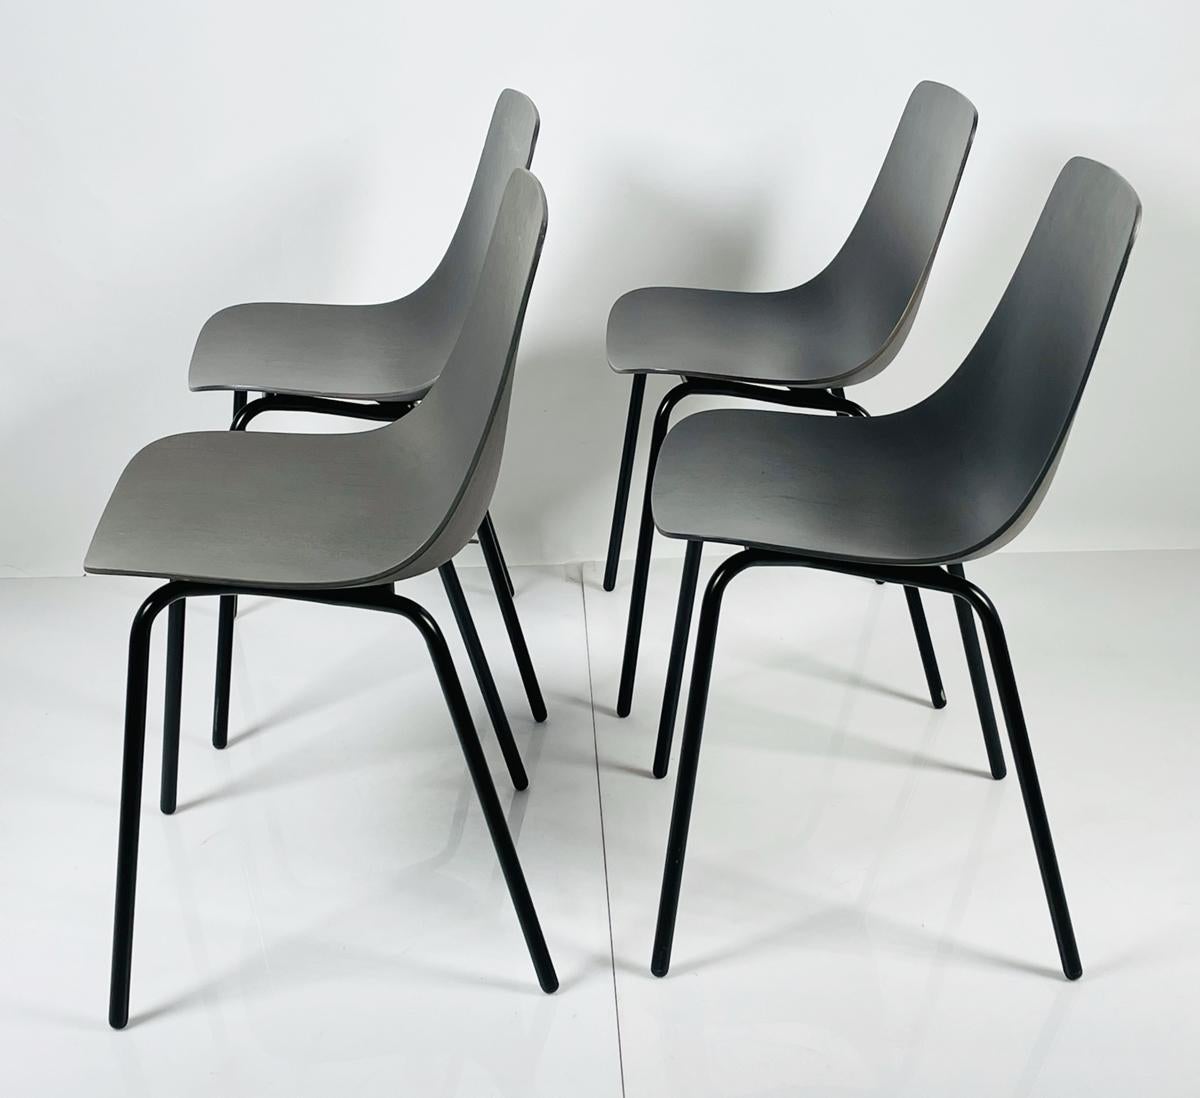 Contemporary Set of Four Modern Chairs with Molded Seats and Black Metal Frames For Sale